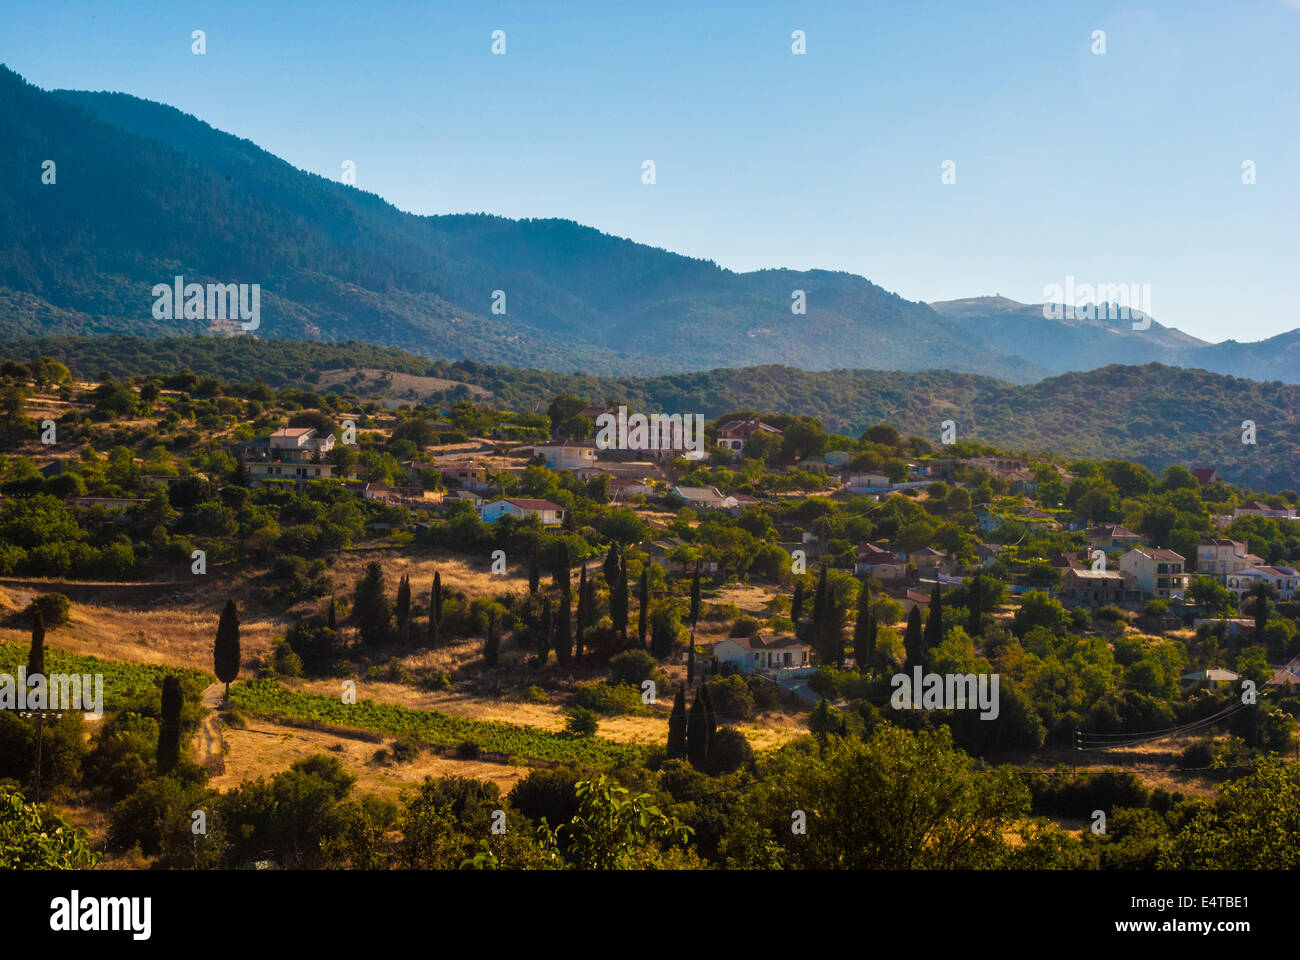 Fir Tree valley in Greece Stock Photo